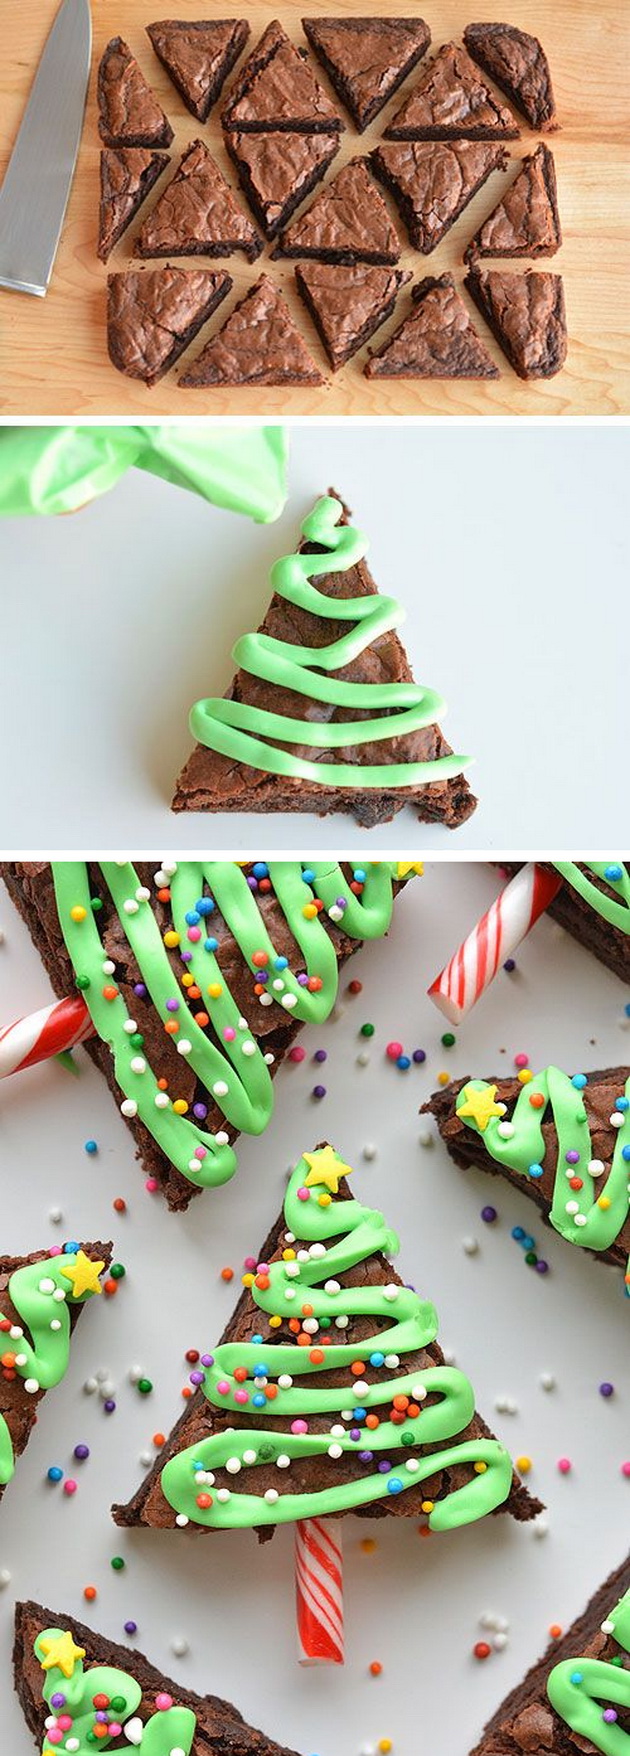 10-Ideas-How-to-Decorate-Your-Christmas-Food-3